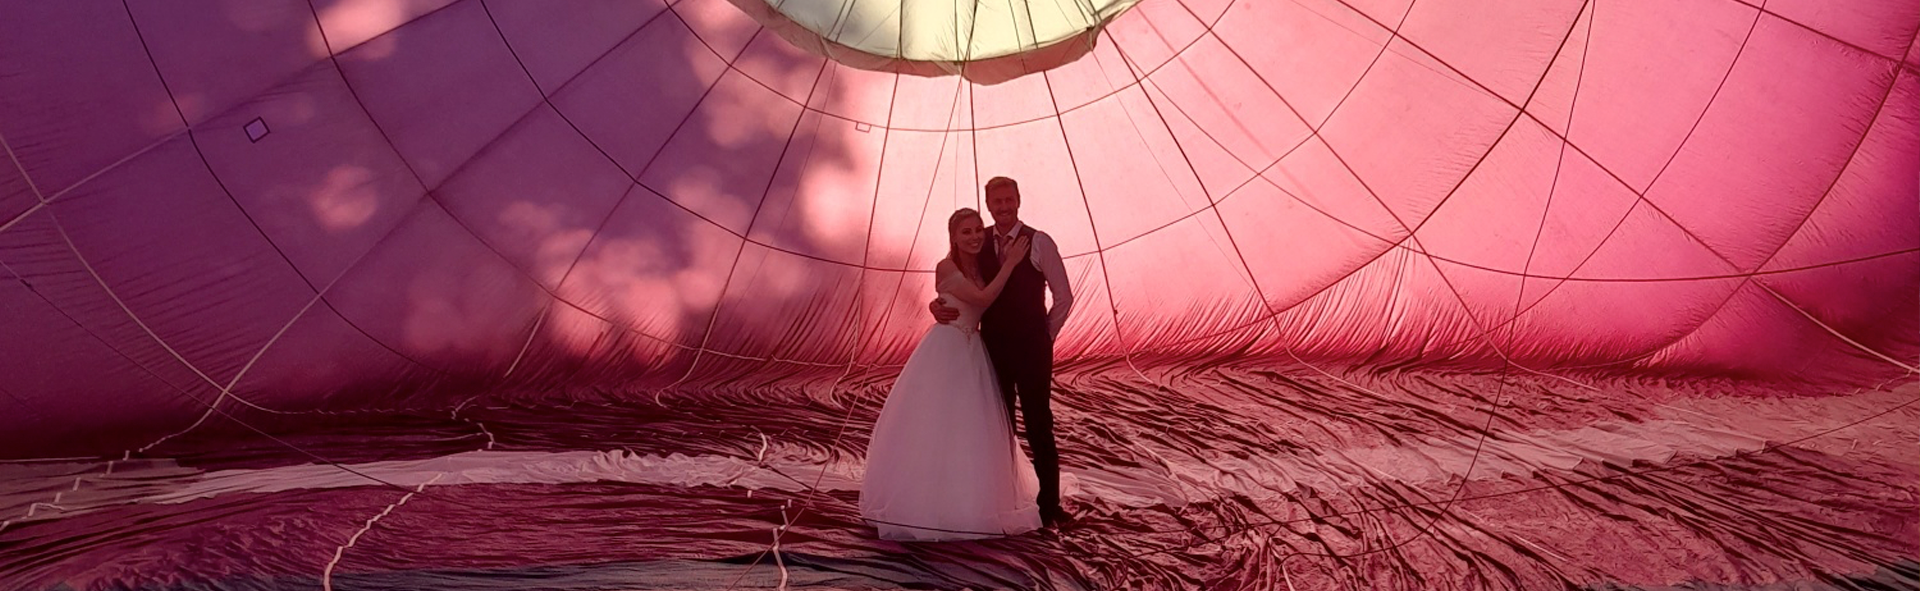 Hot air balloon hire for weddings and events